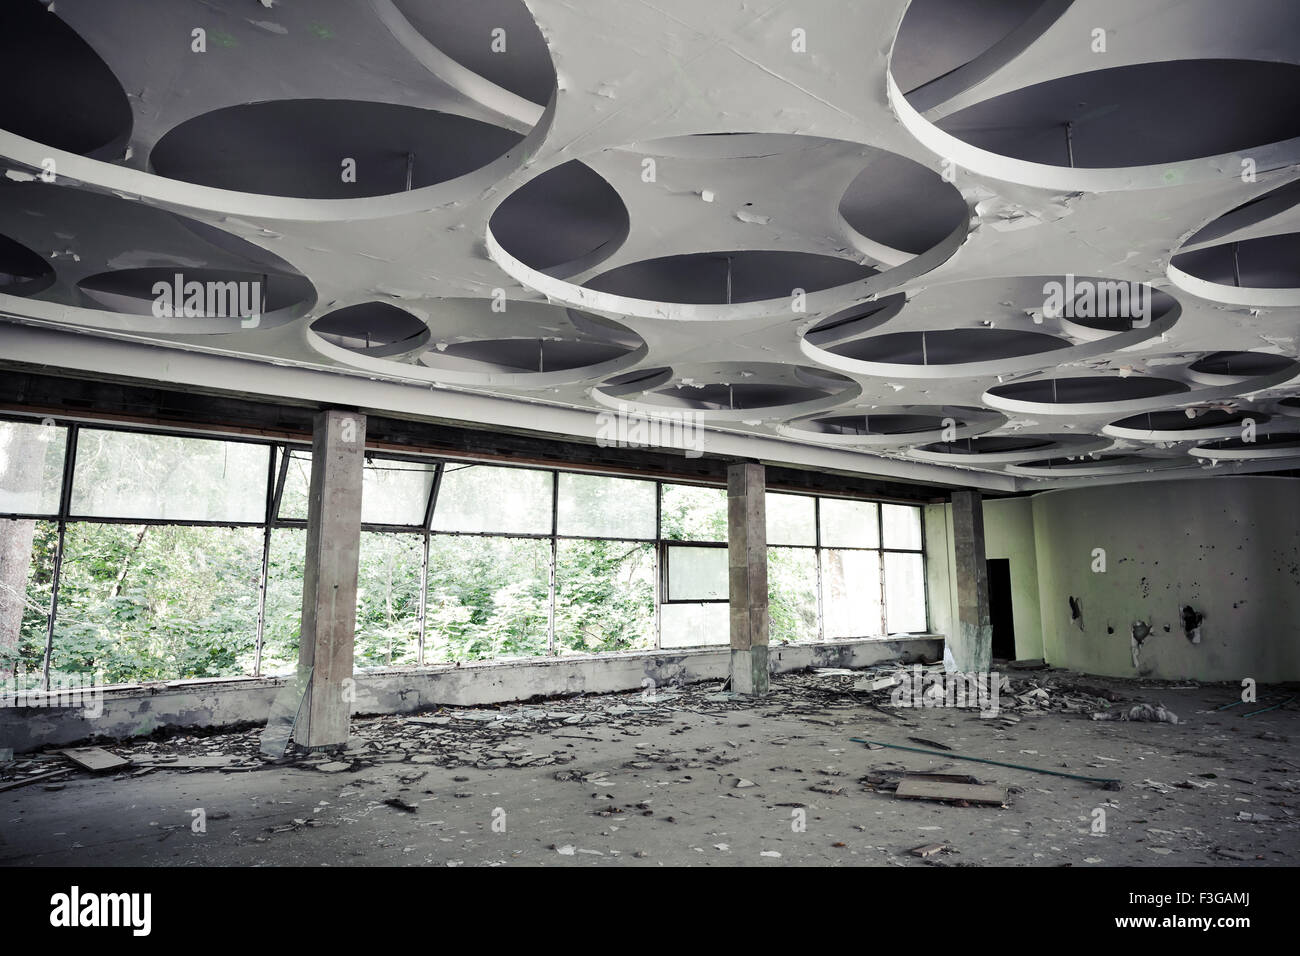 Abandoned industrial building interior. Empty hall with round pattern on ceiling Stock Photo